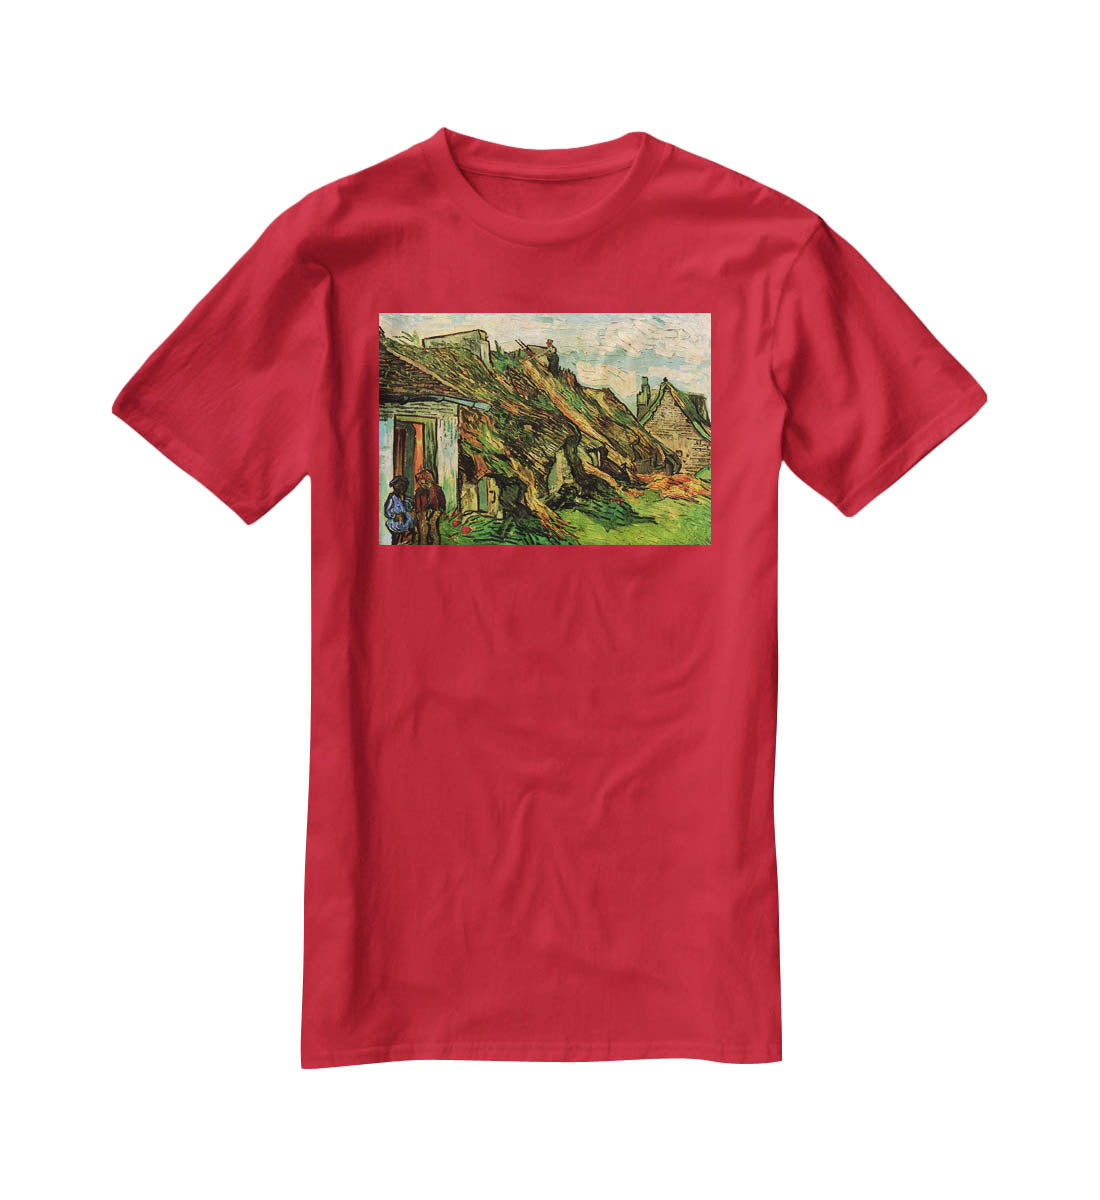 Thatched Sandstone Cottages in Chaponval by Van Gogh T-Shirt - Canvas Art Rocks - 4